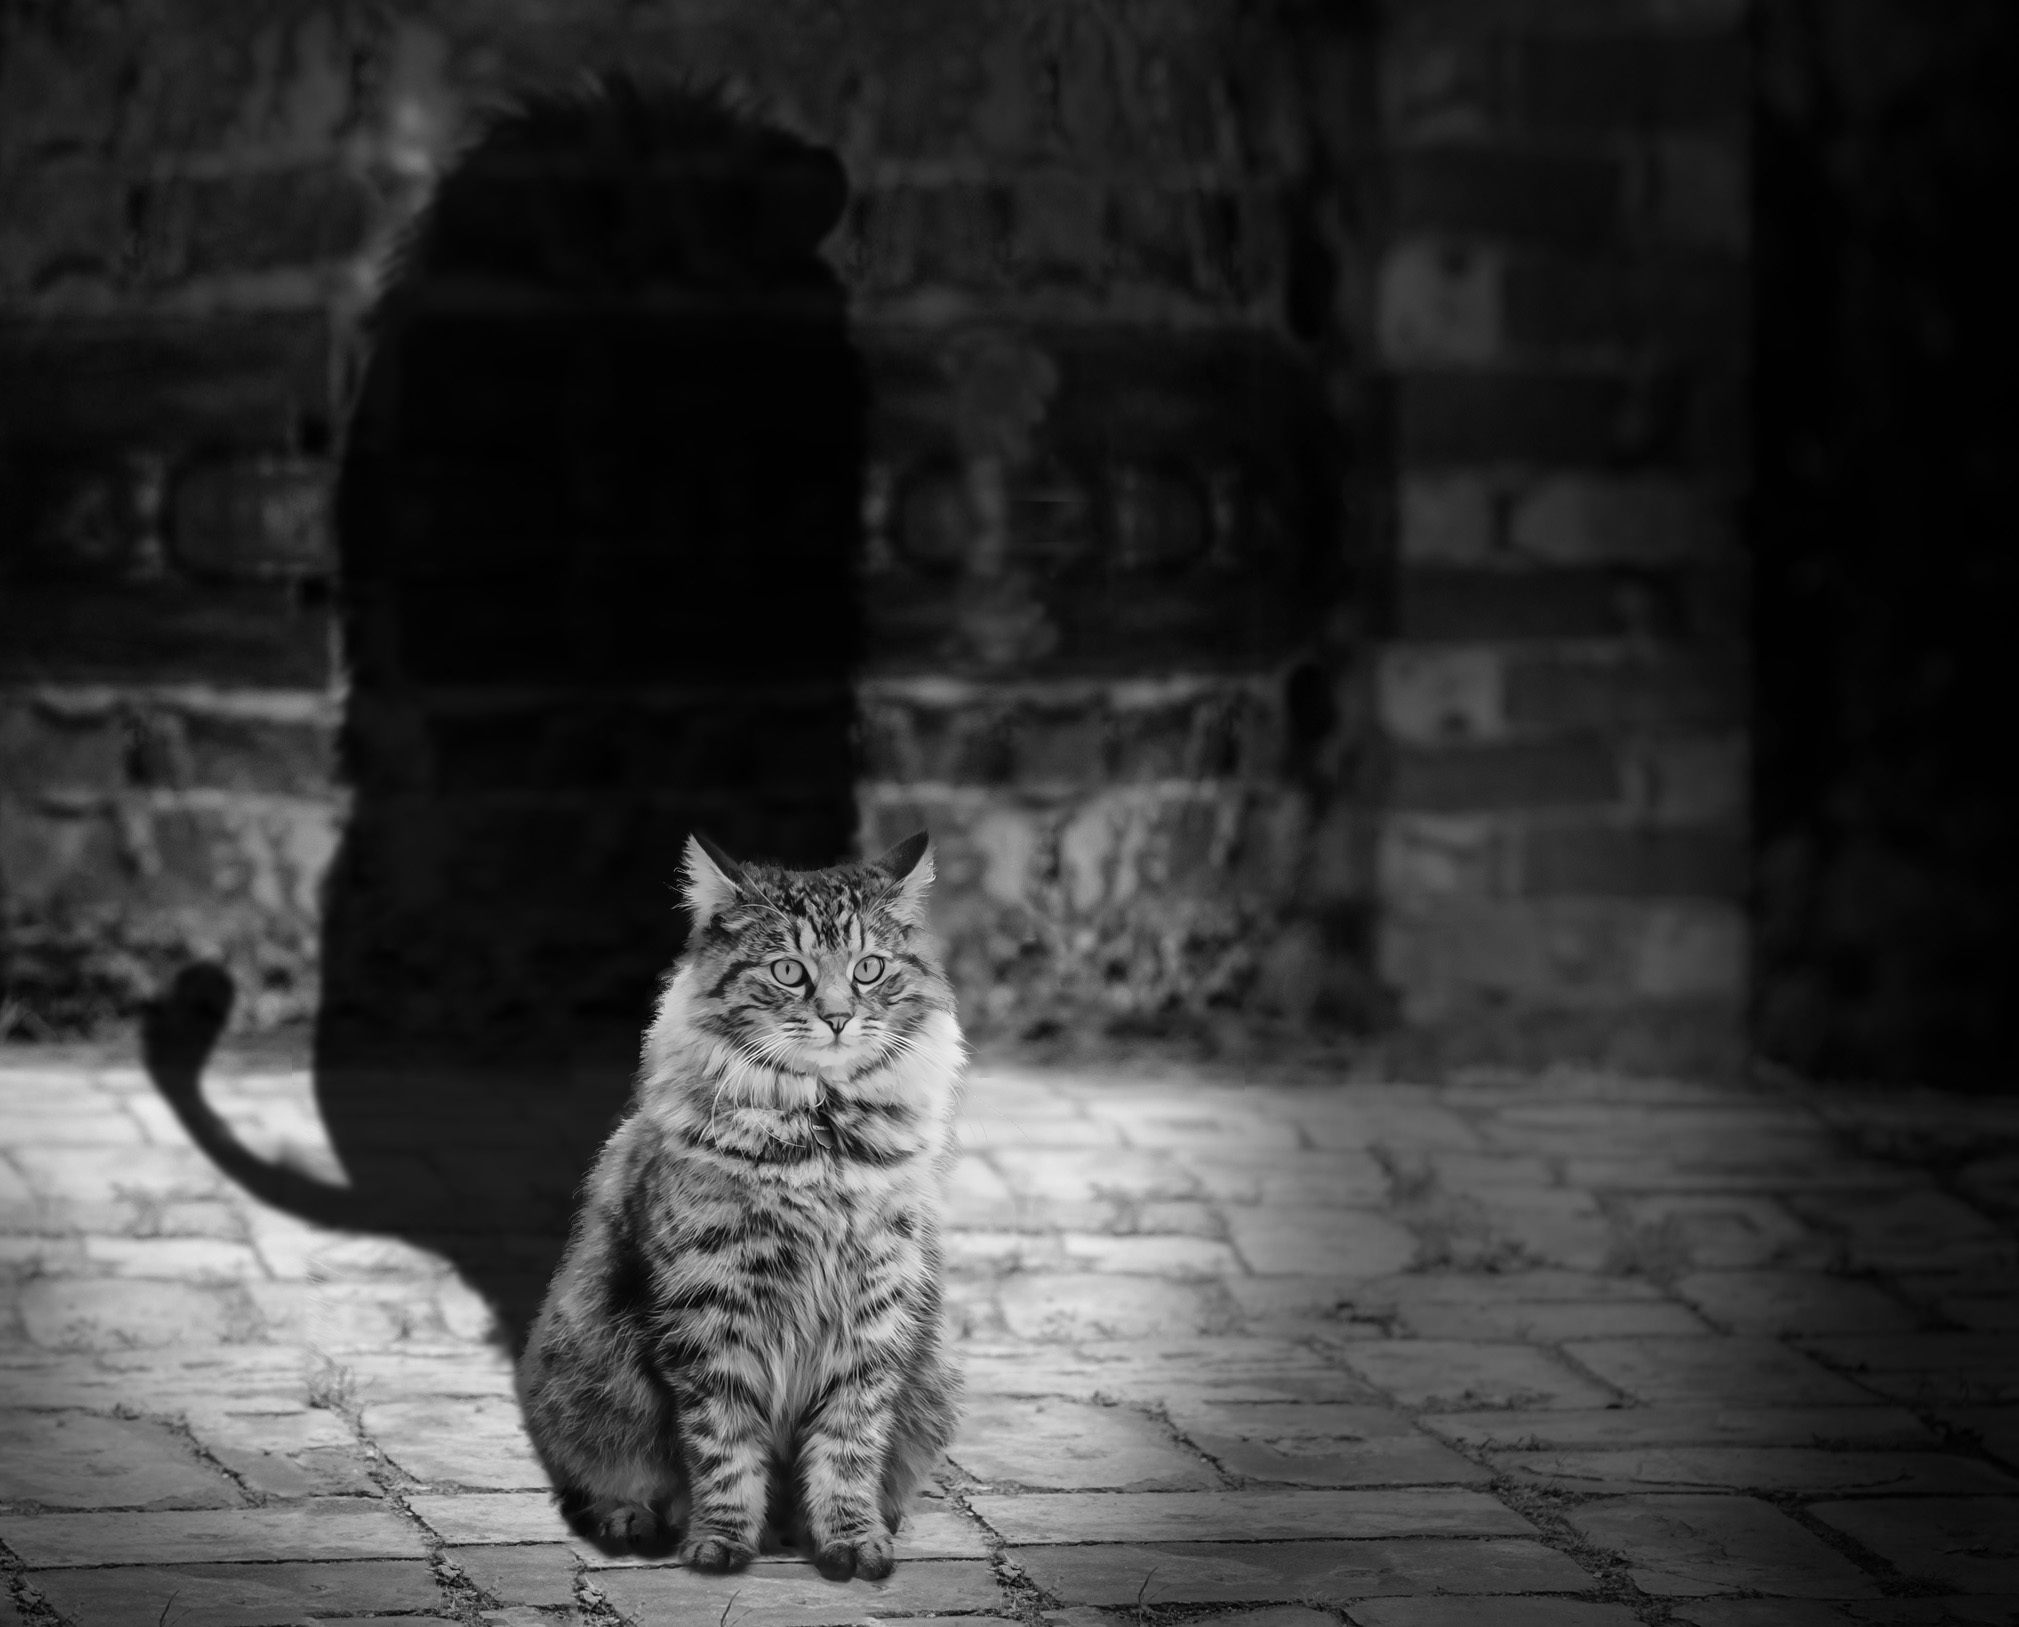 chb, animals, cat, shadow, lion, bw images